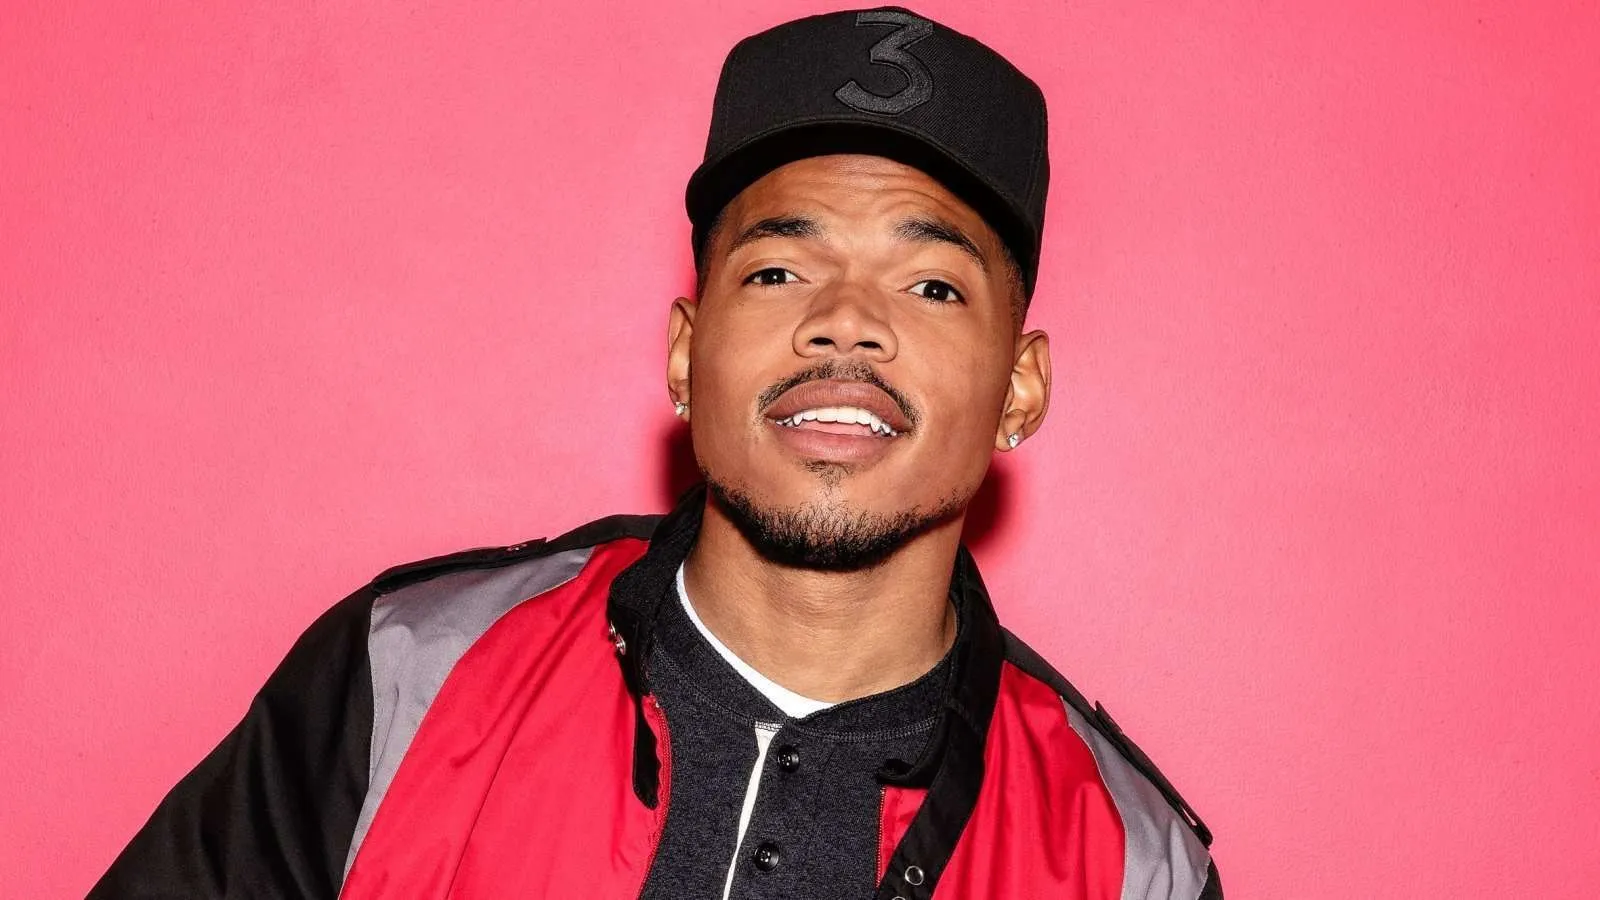 Chance the Rapper in black hat and red jacket